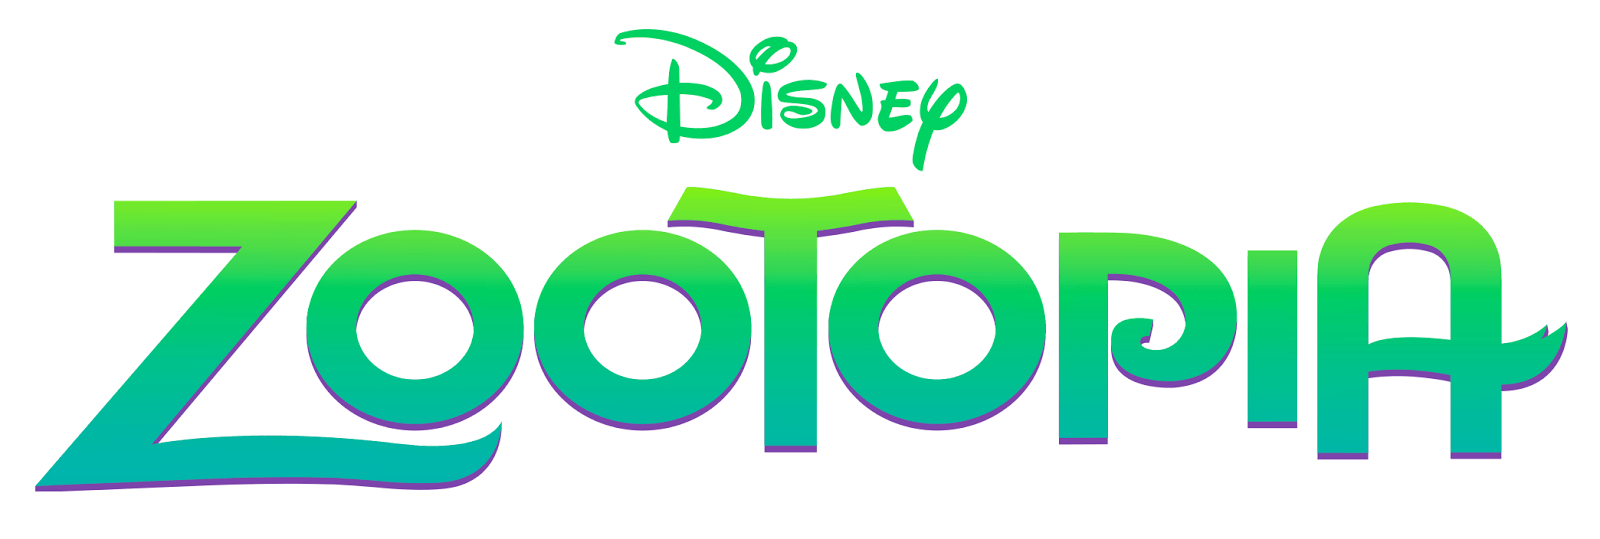 Disney Movies Anywhere Logo - Thanks, Mail Carrier. Fall in Love with Zootopia on Digital HD, Blu